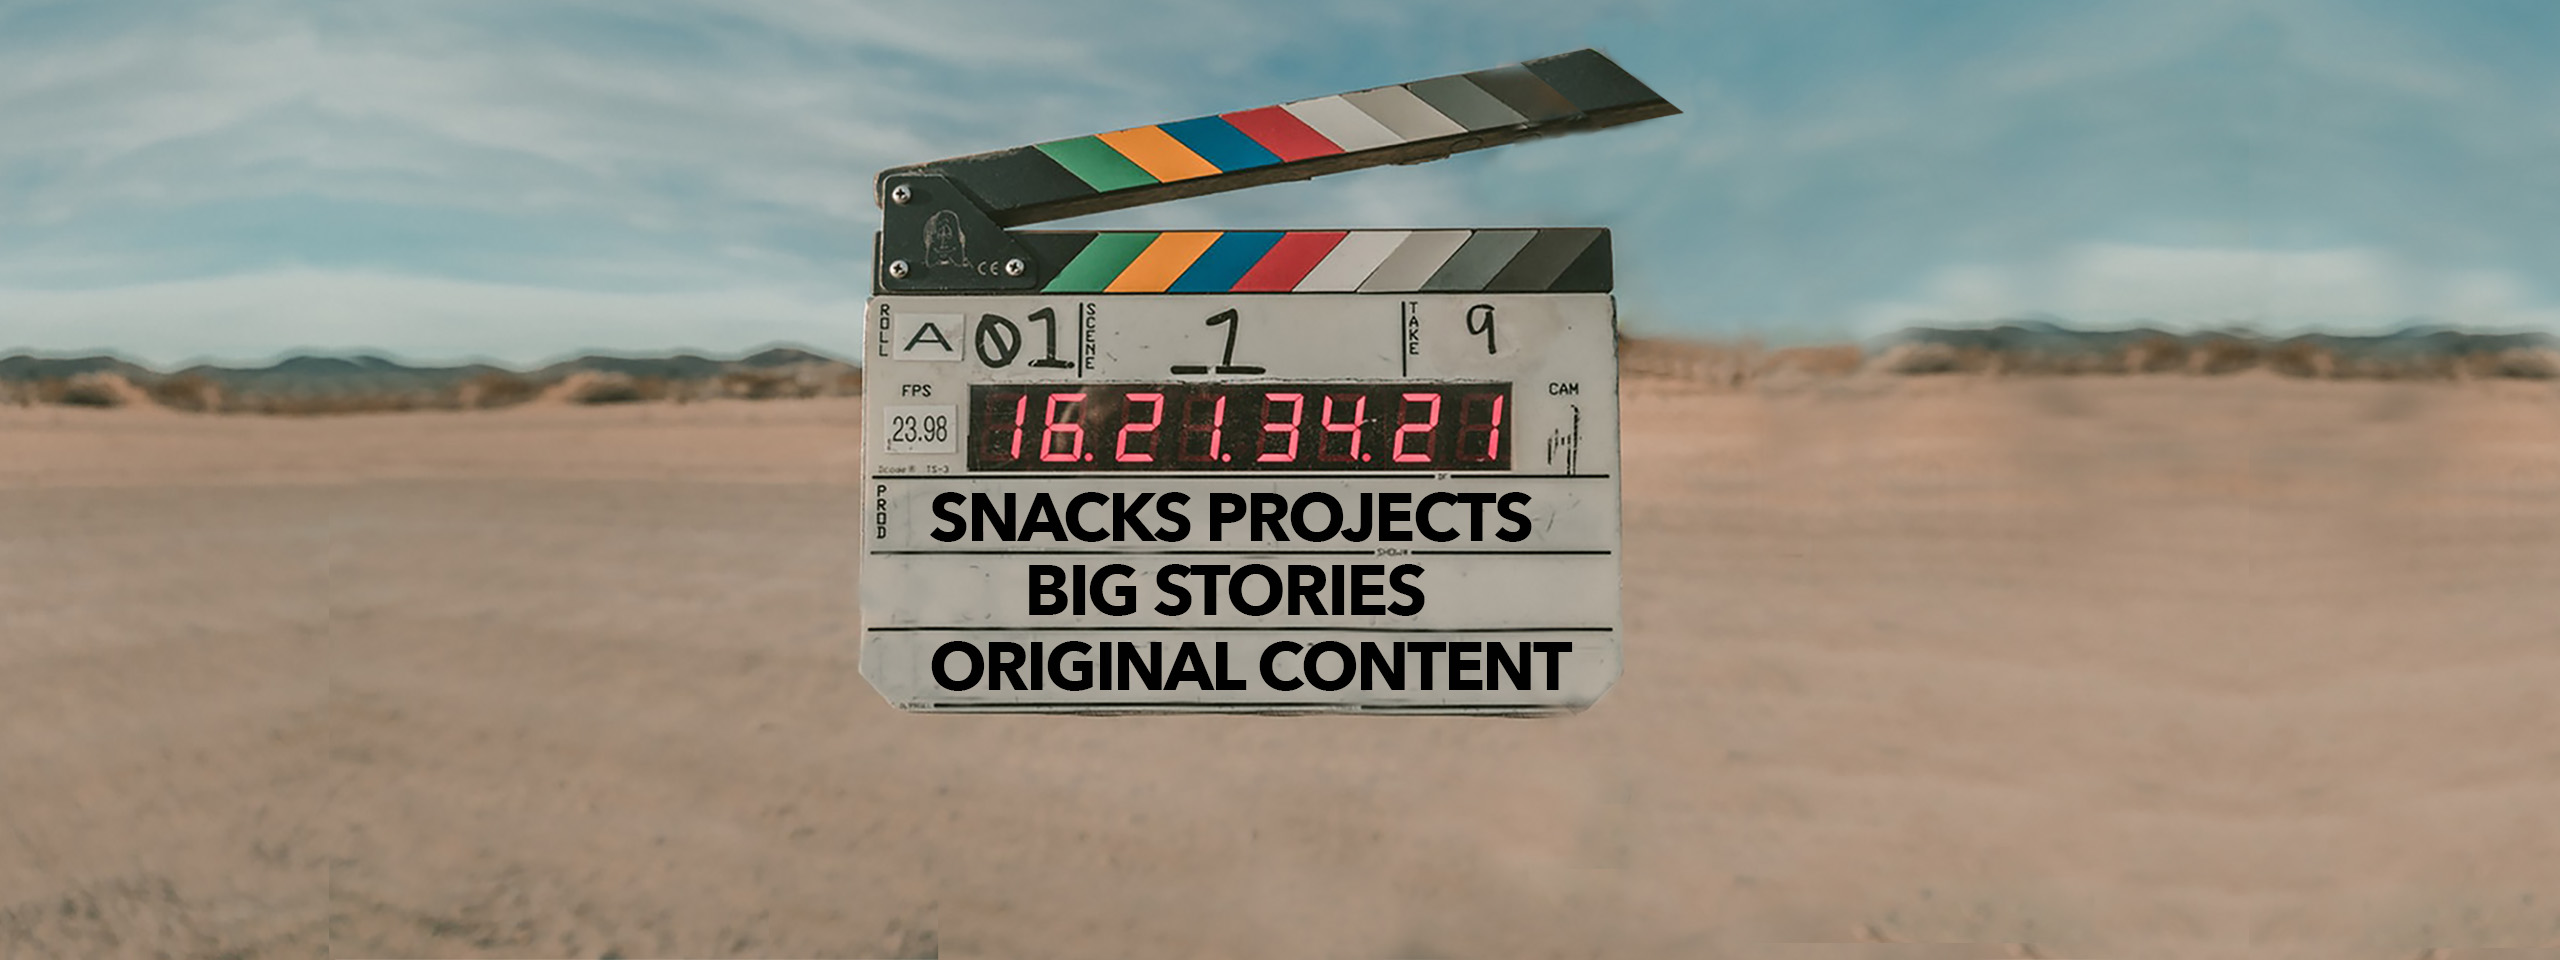 SNACKS PROJECTS WEB